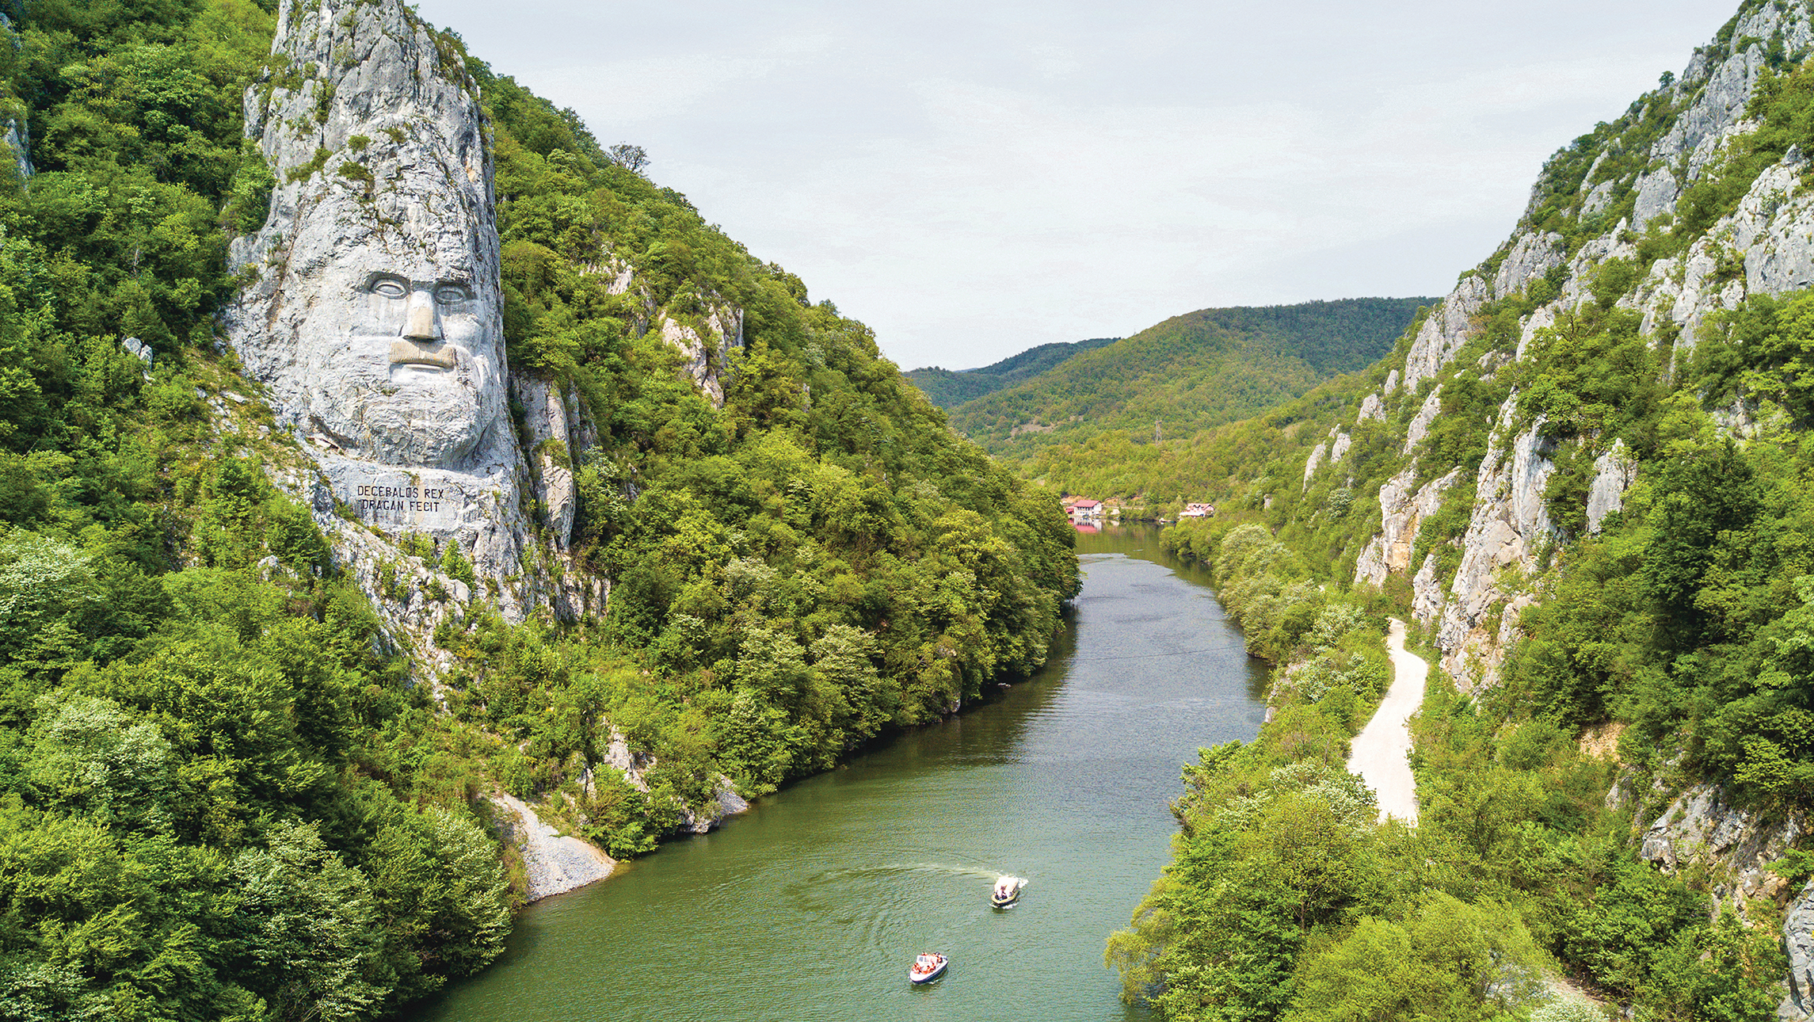 The Iron Gates on the Danube River in Romania in the gorge